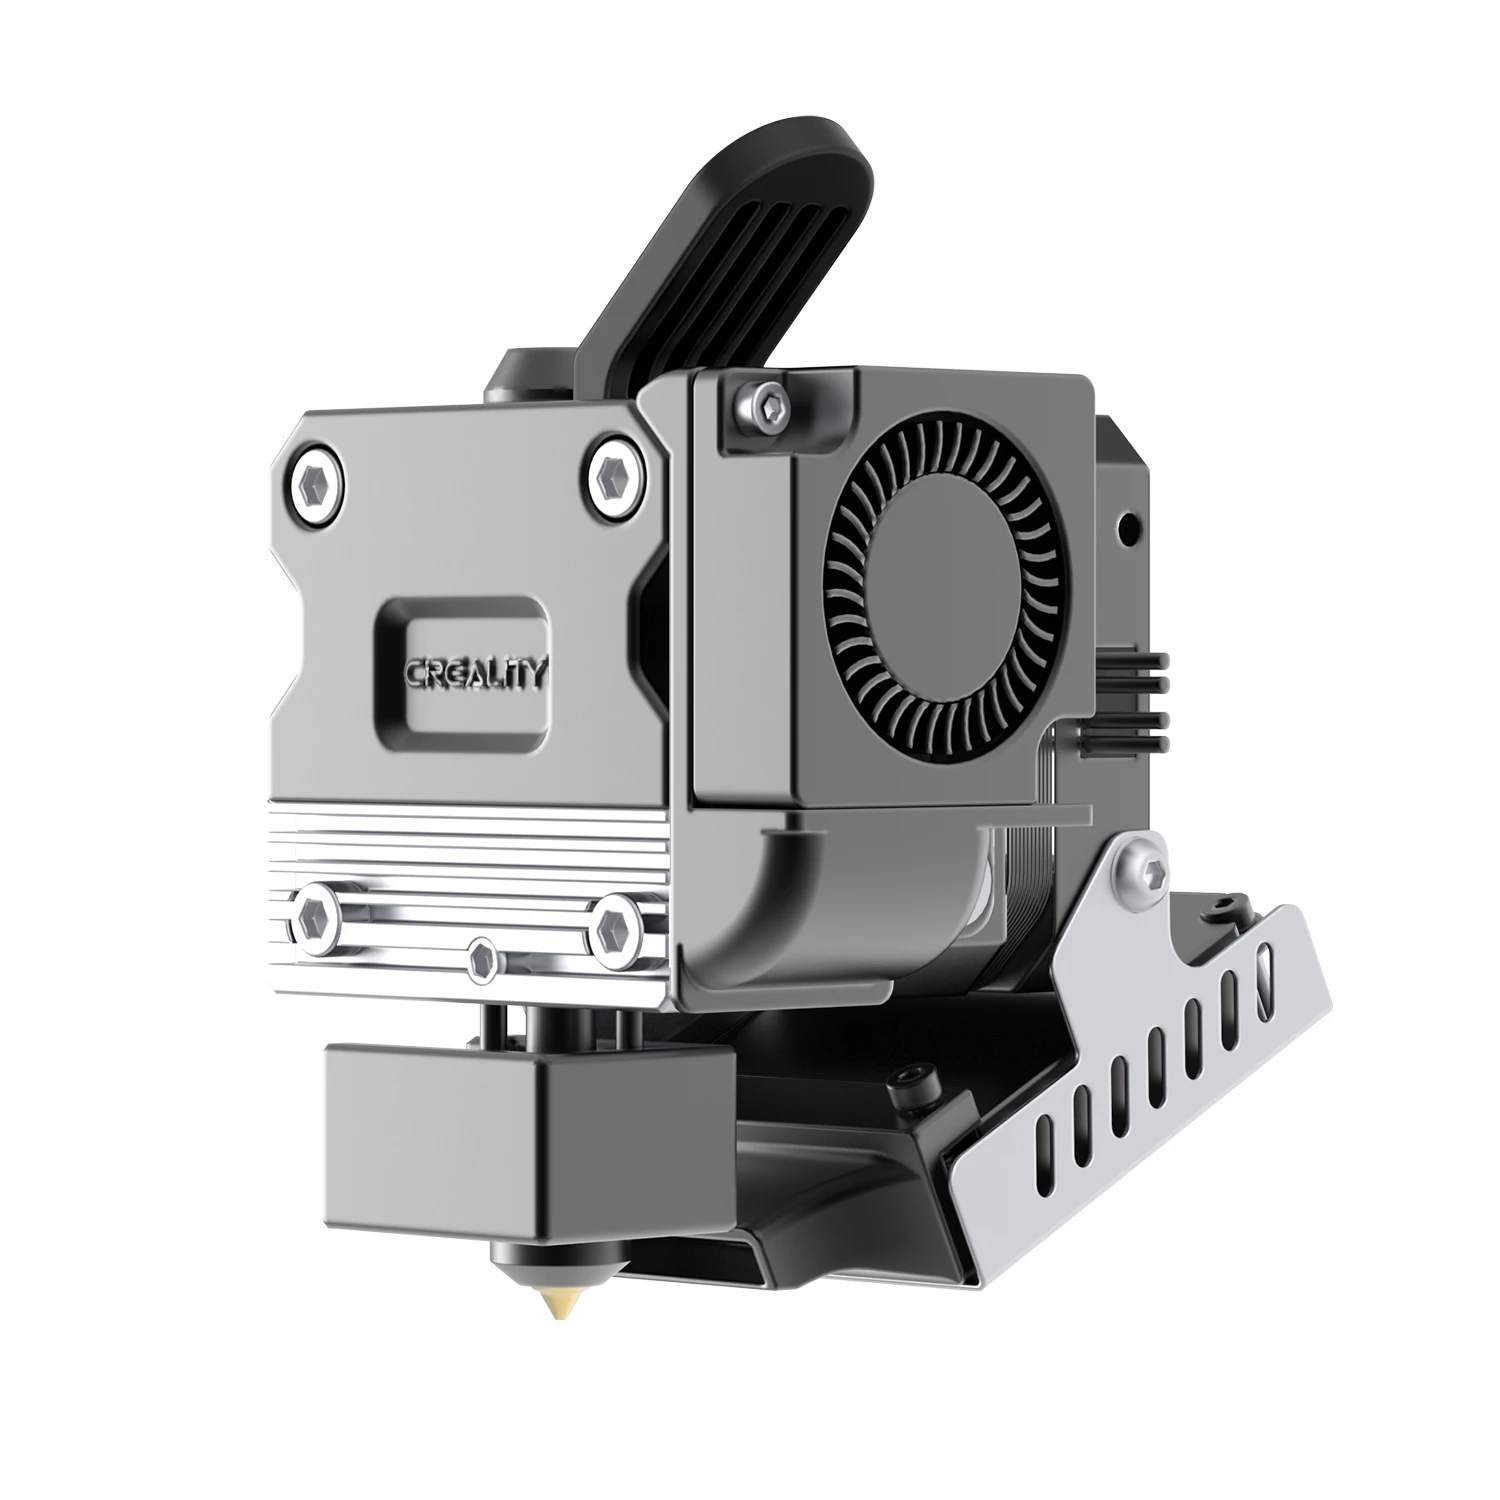 CREALITY 3D Original Ender-3 S1 Standard Sprite Extruder 3.5:1 Gear Ratio Dual Gear Direct Bowden Extrusion for Ender-3 S1